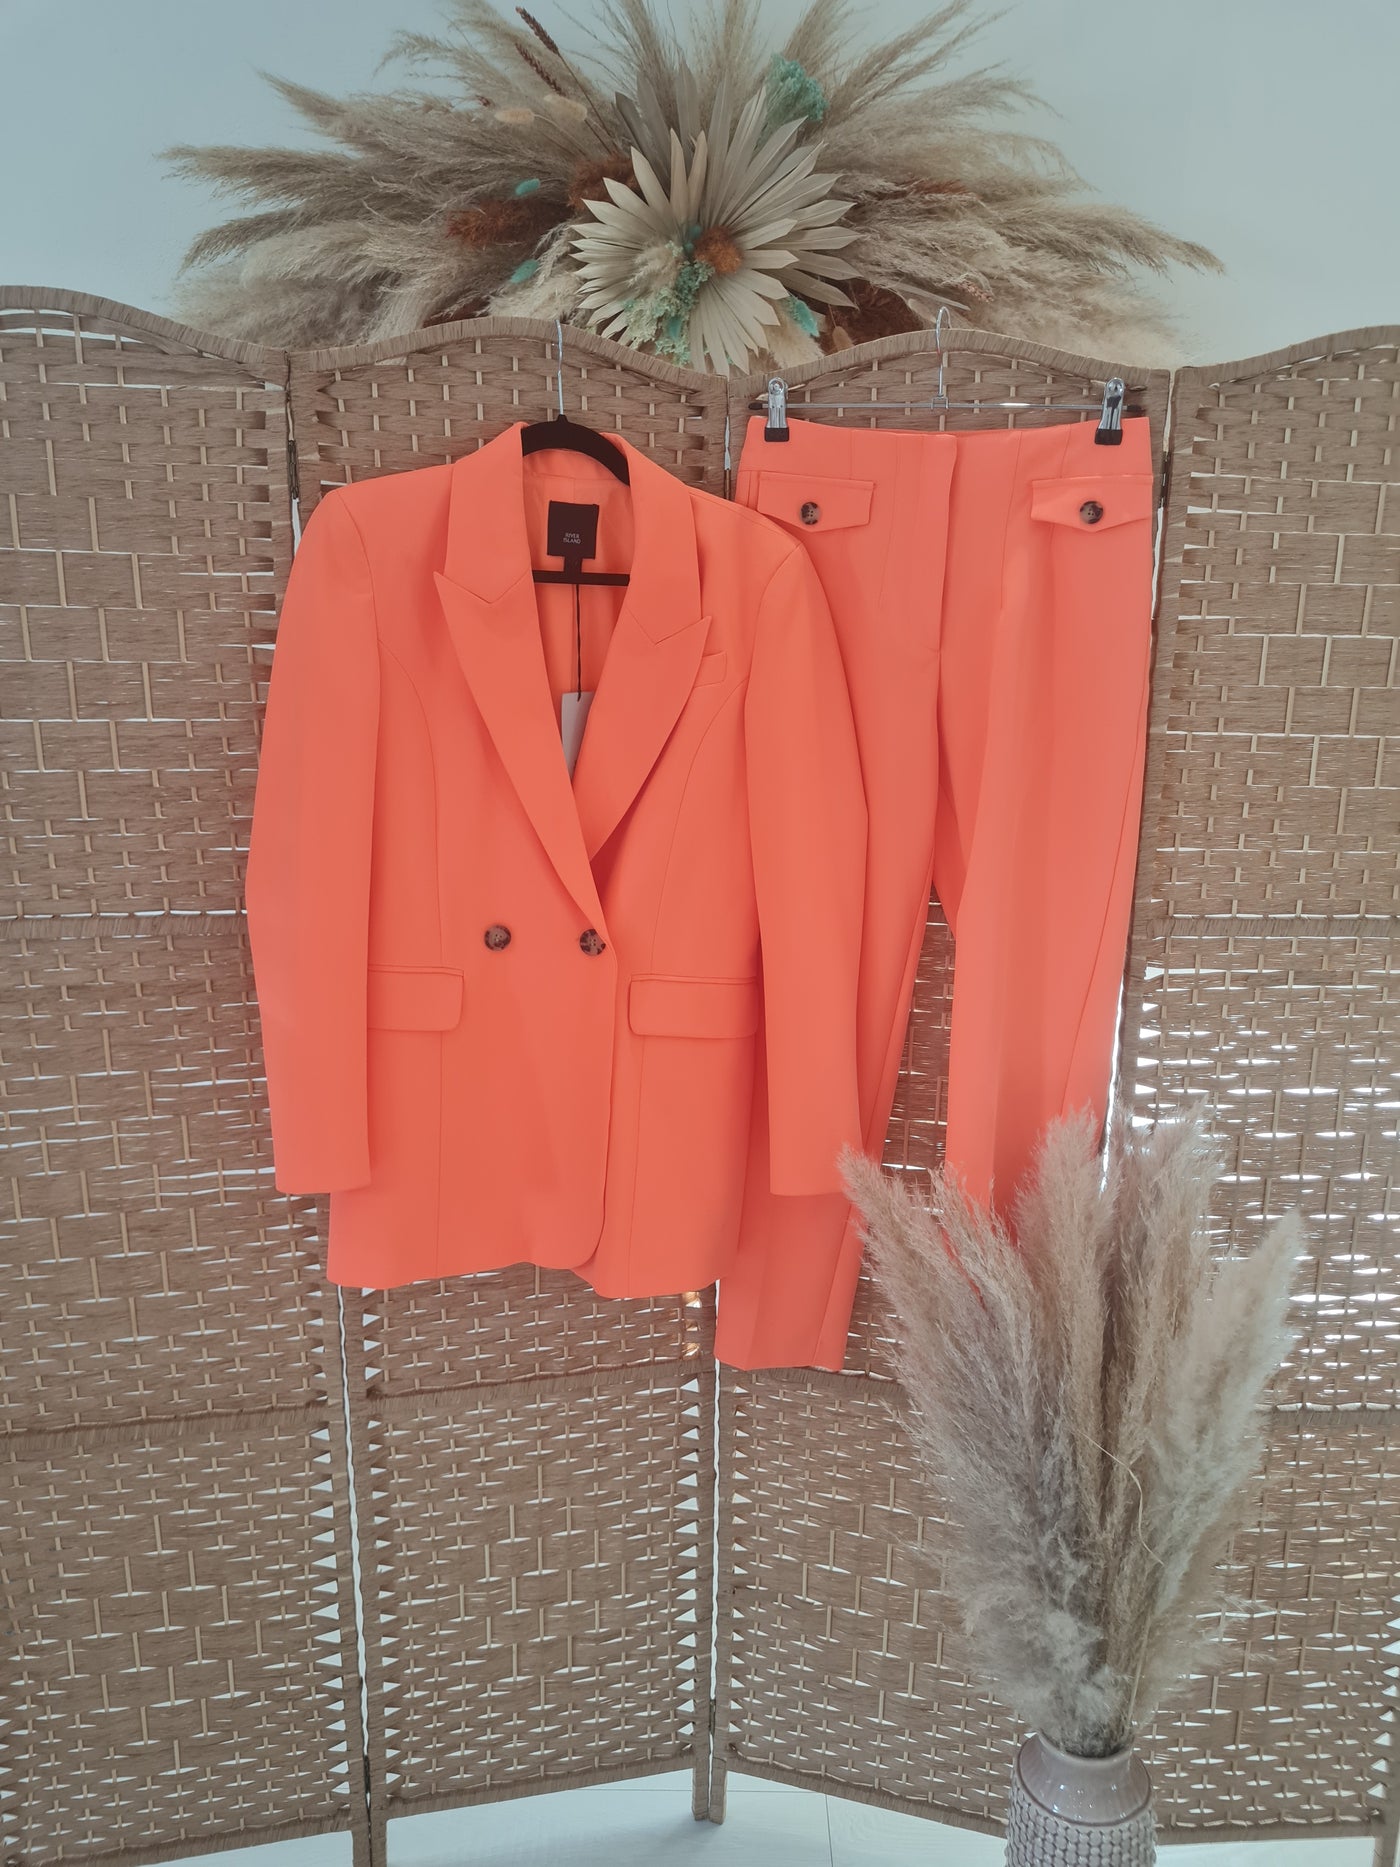 River island Coral Trouser Suit 8/6 New